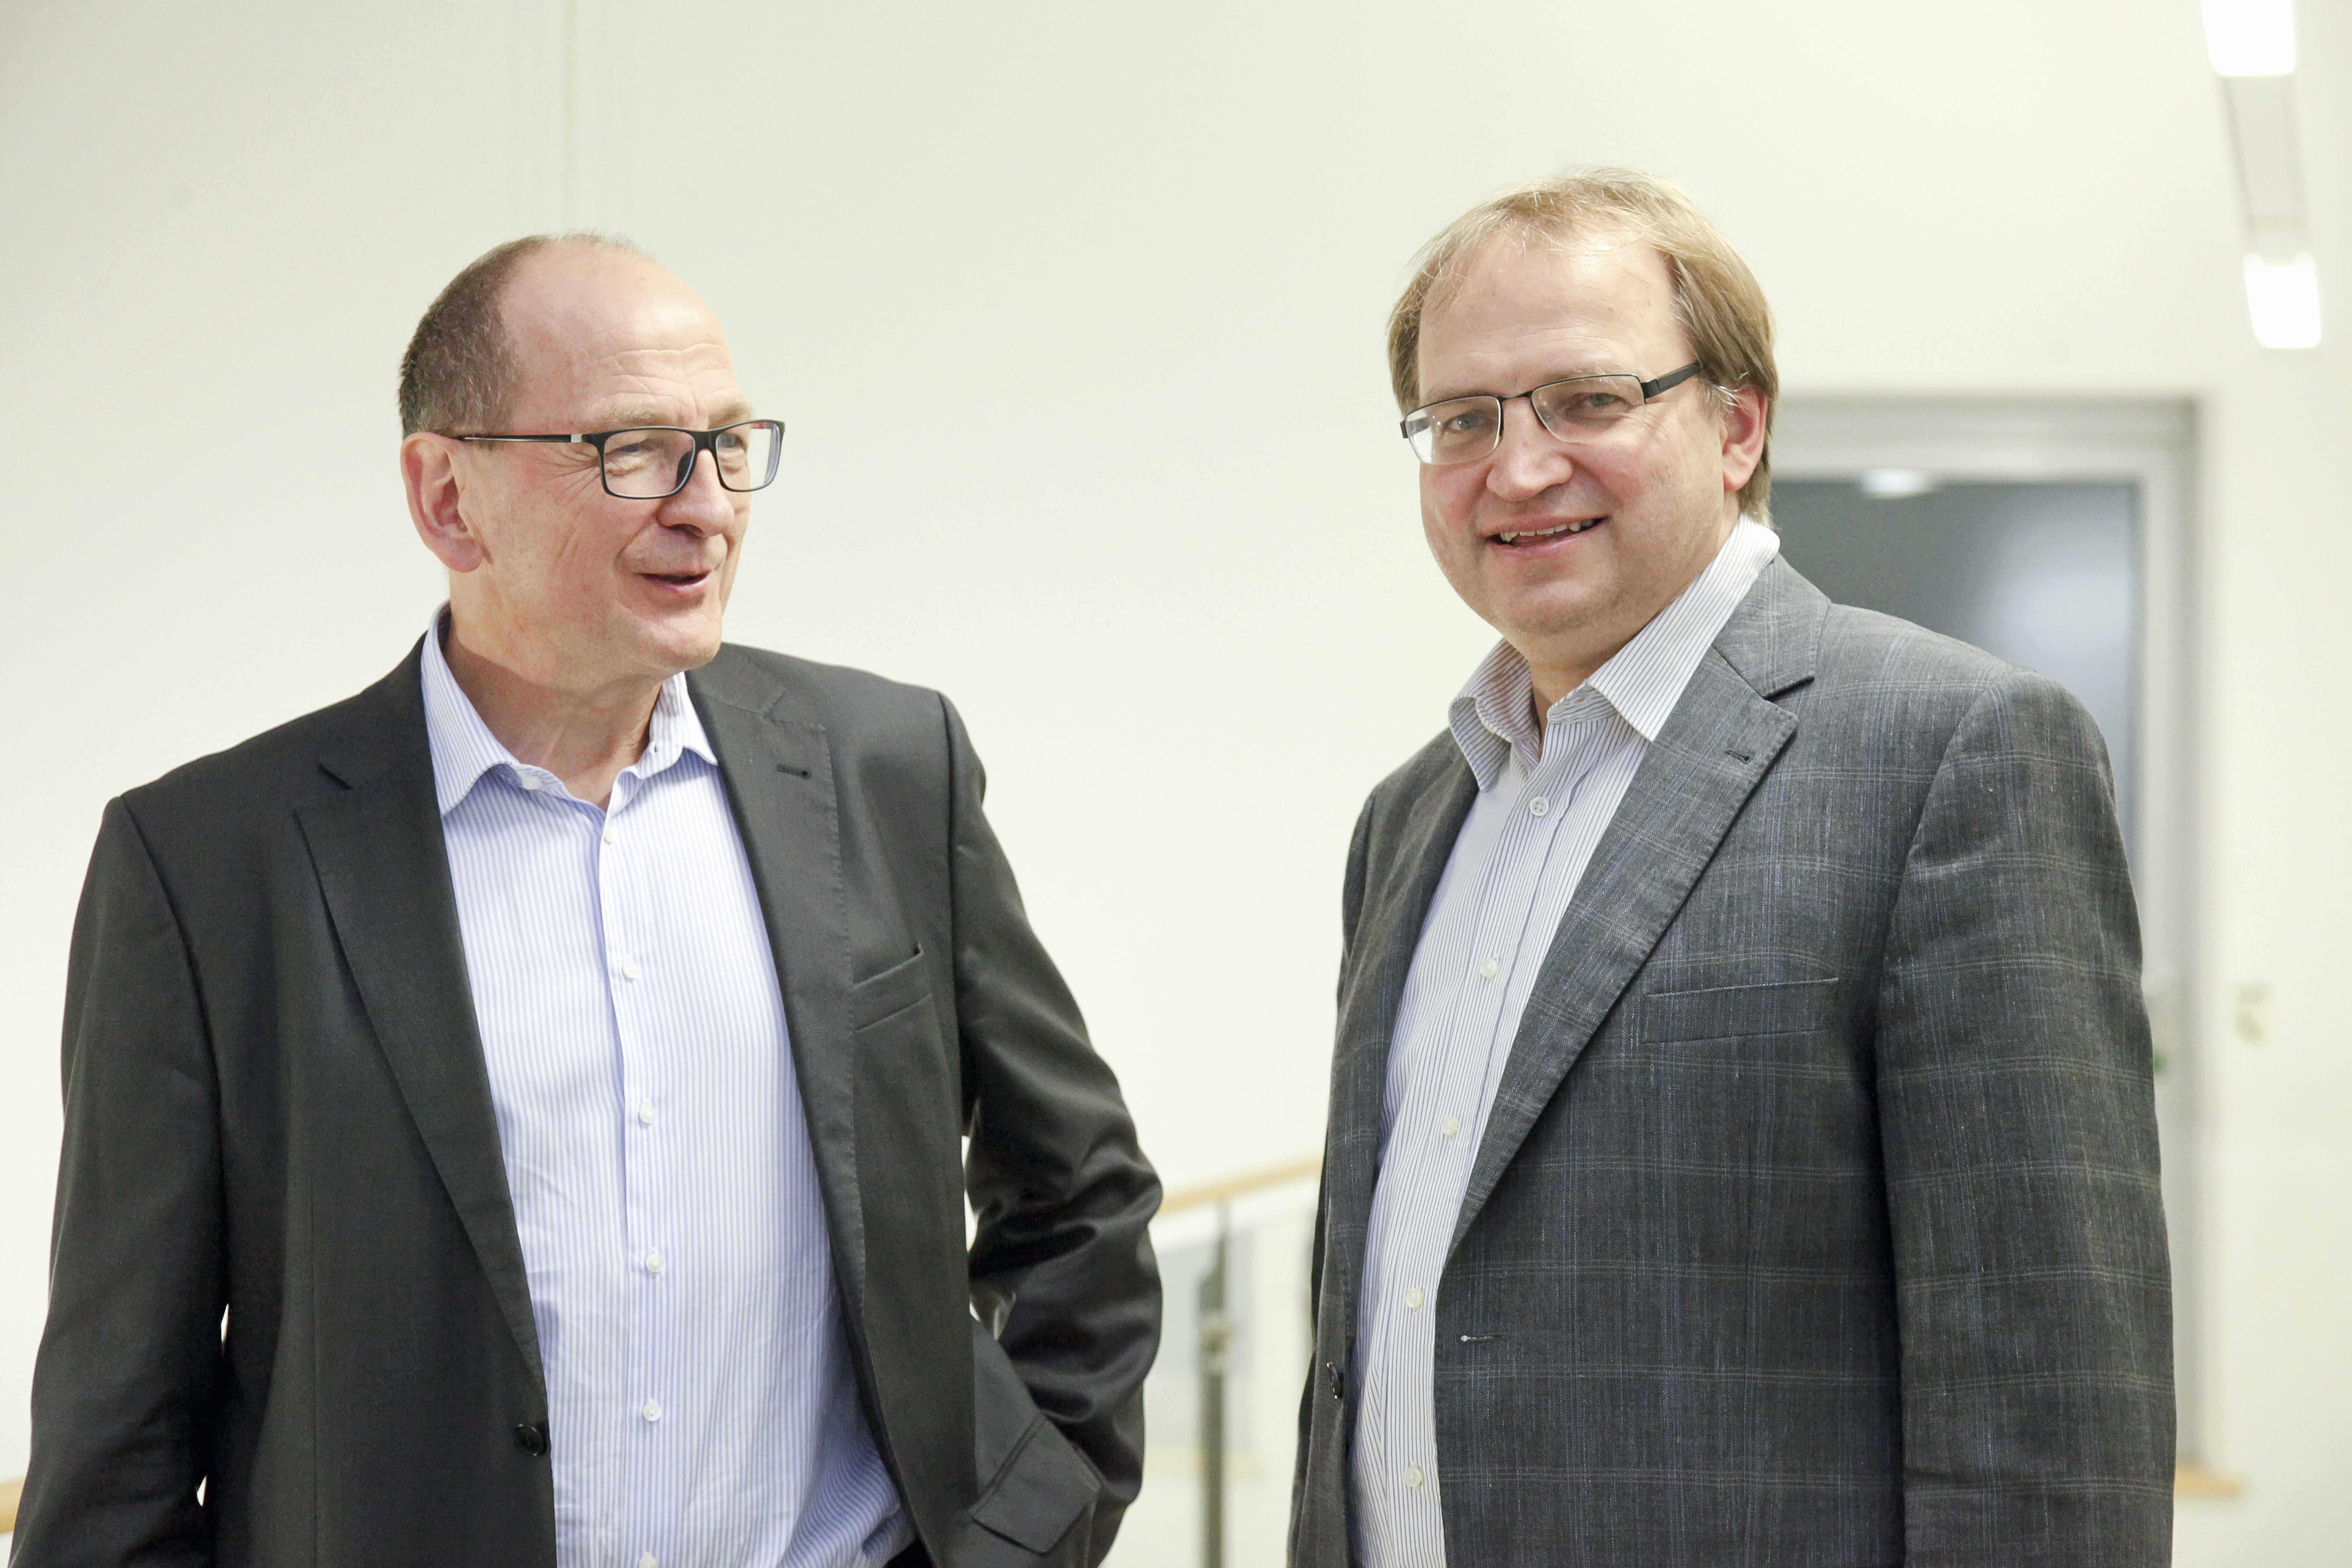 Executive Director Prof. Dr. Albert Heuberger (left) and Director with focus on Audio & Multimedia Dr. Bernhard Grill (right)